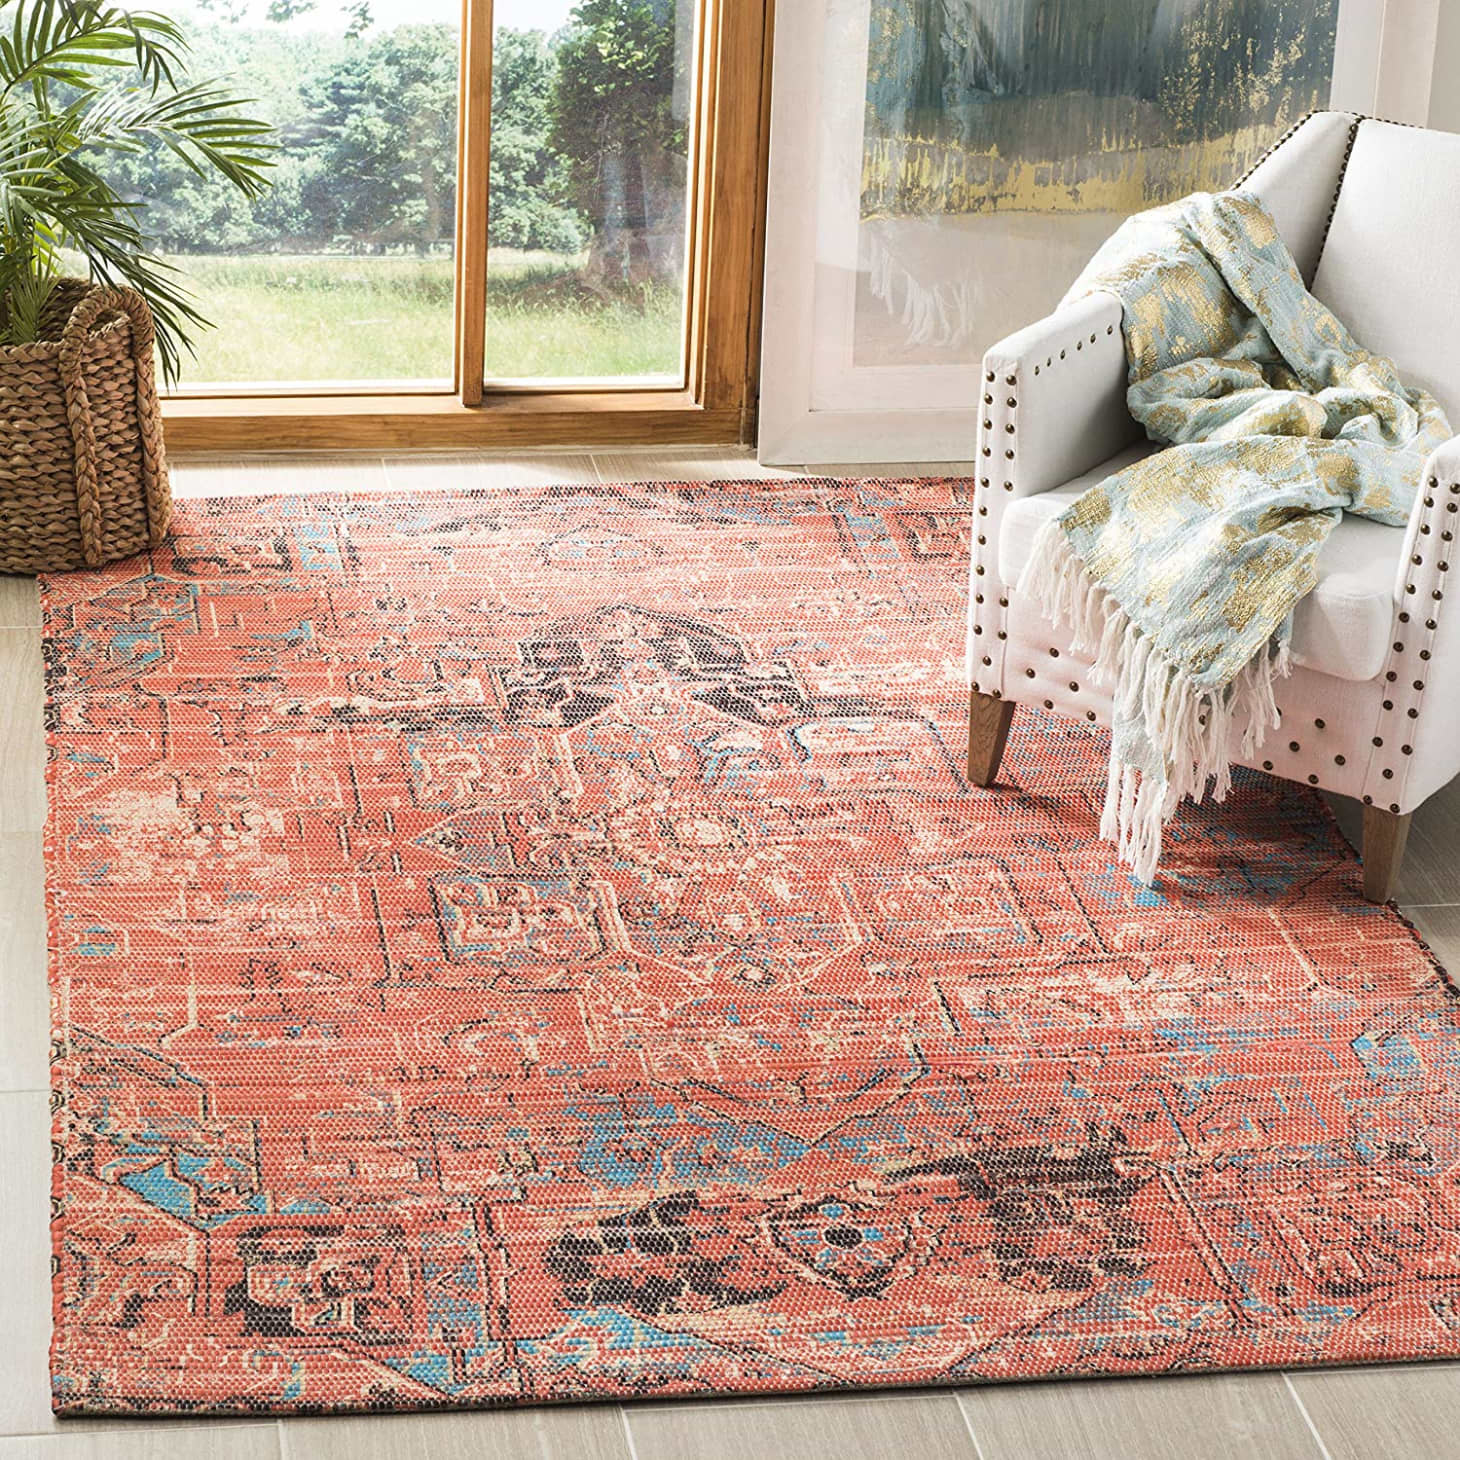 Cheap Area Rugs on Amazon - Affordable Rugs Online | Apartment Therapy